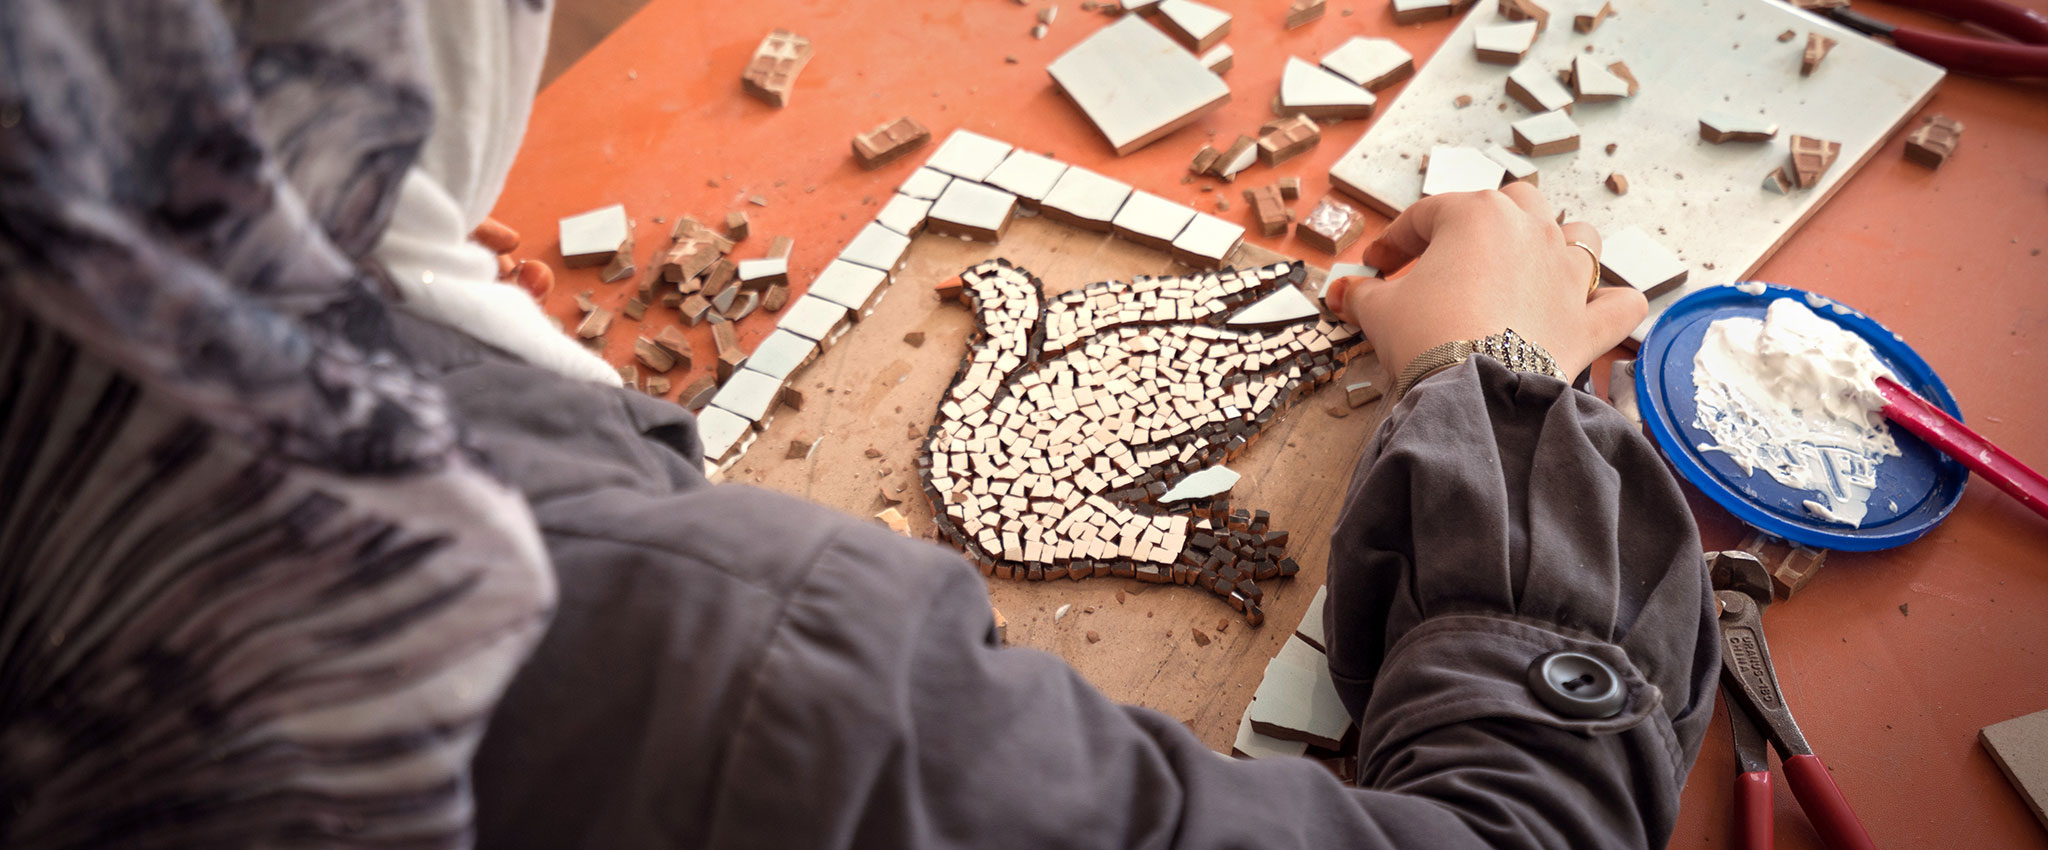 Za’atari refugee camp in Jordan, 2015. A woman crafts a mosaic depicting a peace dove. UN Women provides economic empowerment and protection programming for women and girls in the camp. Photo: UN Women/Christopher Herwig